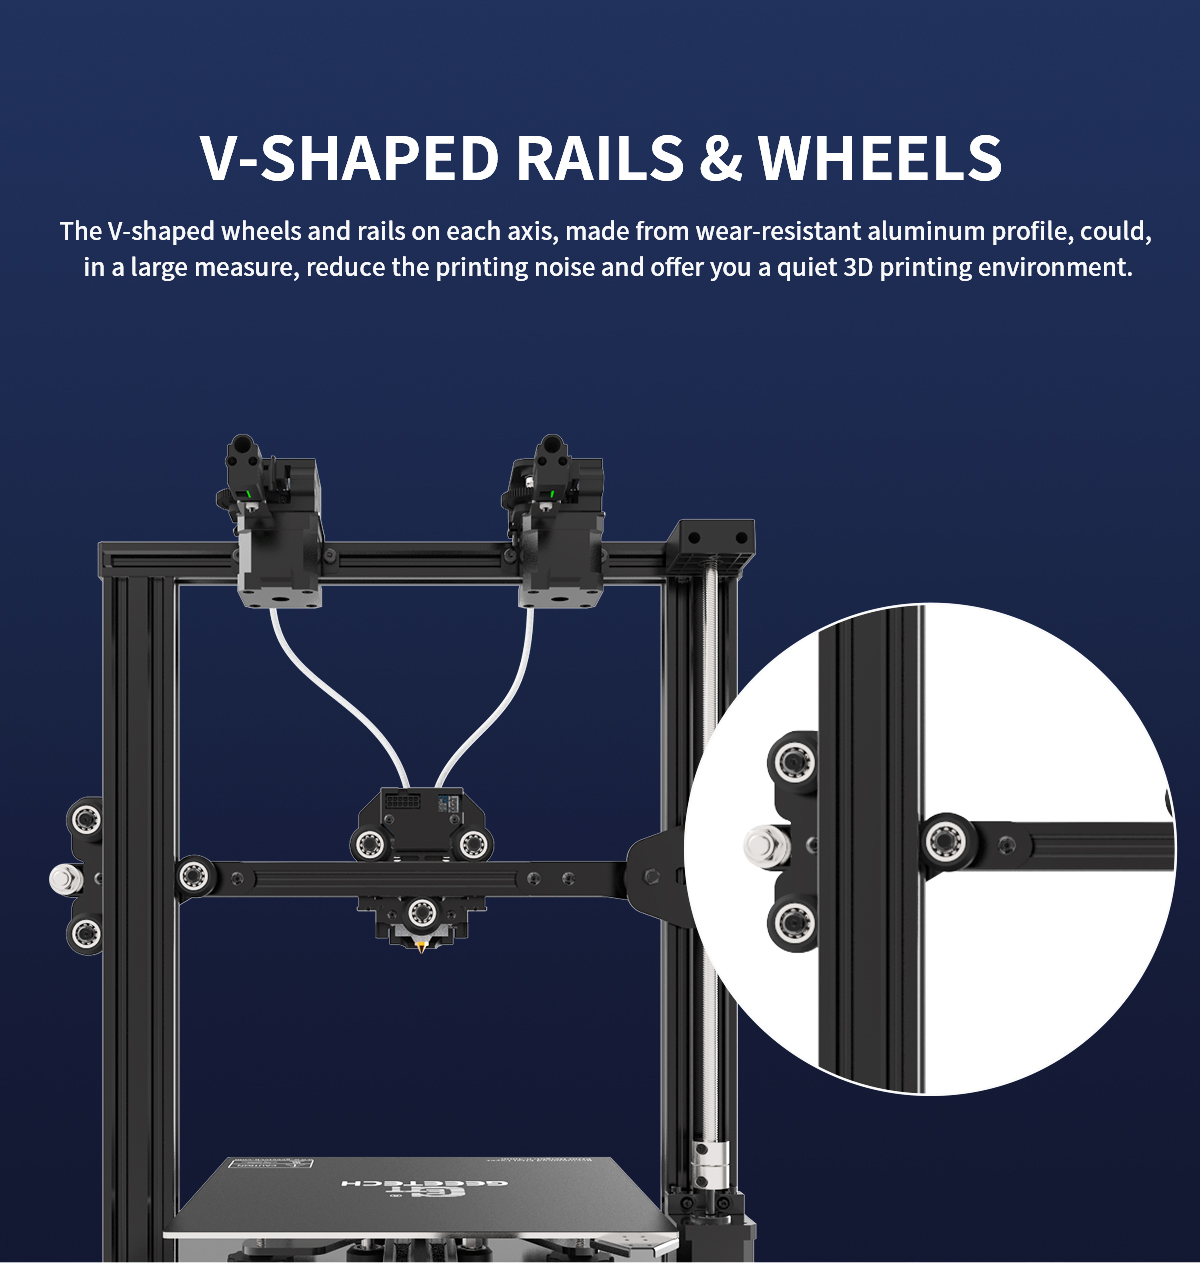 Geeetech a20m description of v-shaped rails and wheels